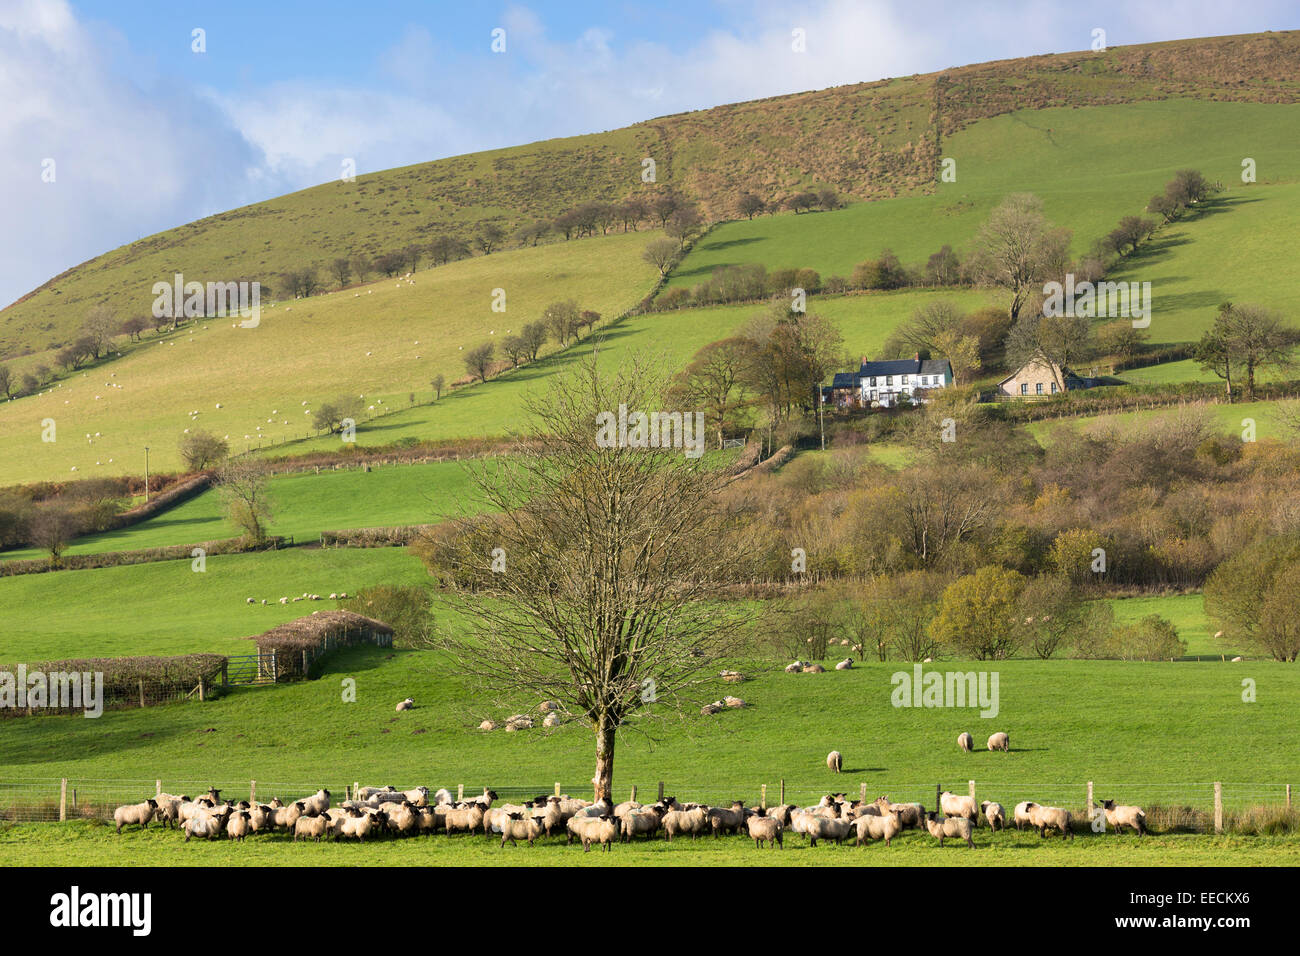 Sheep and a hill farm in a picturesque valley in the Brecon Beacons mountain range, Wales, UK Stock Photo